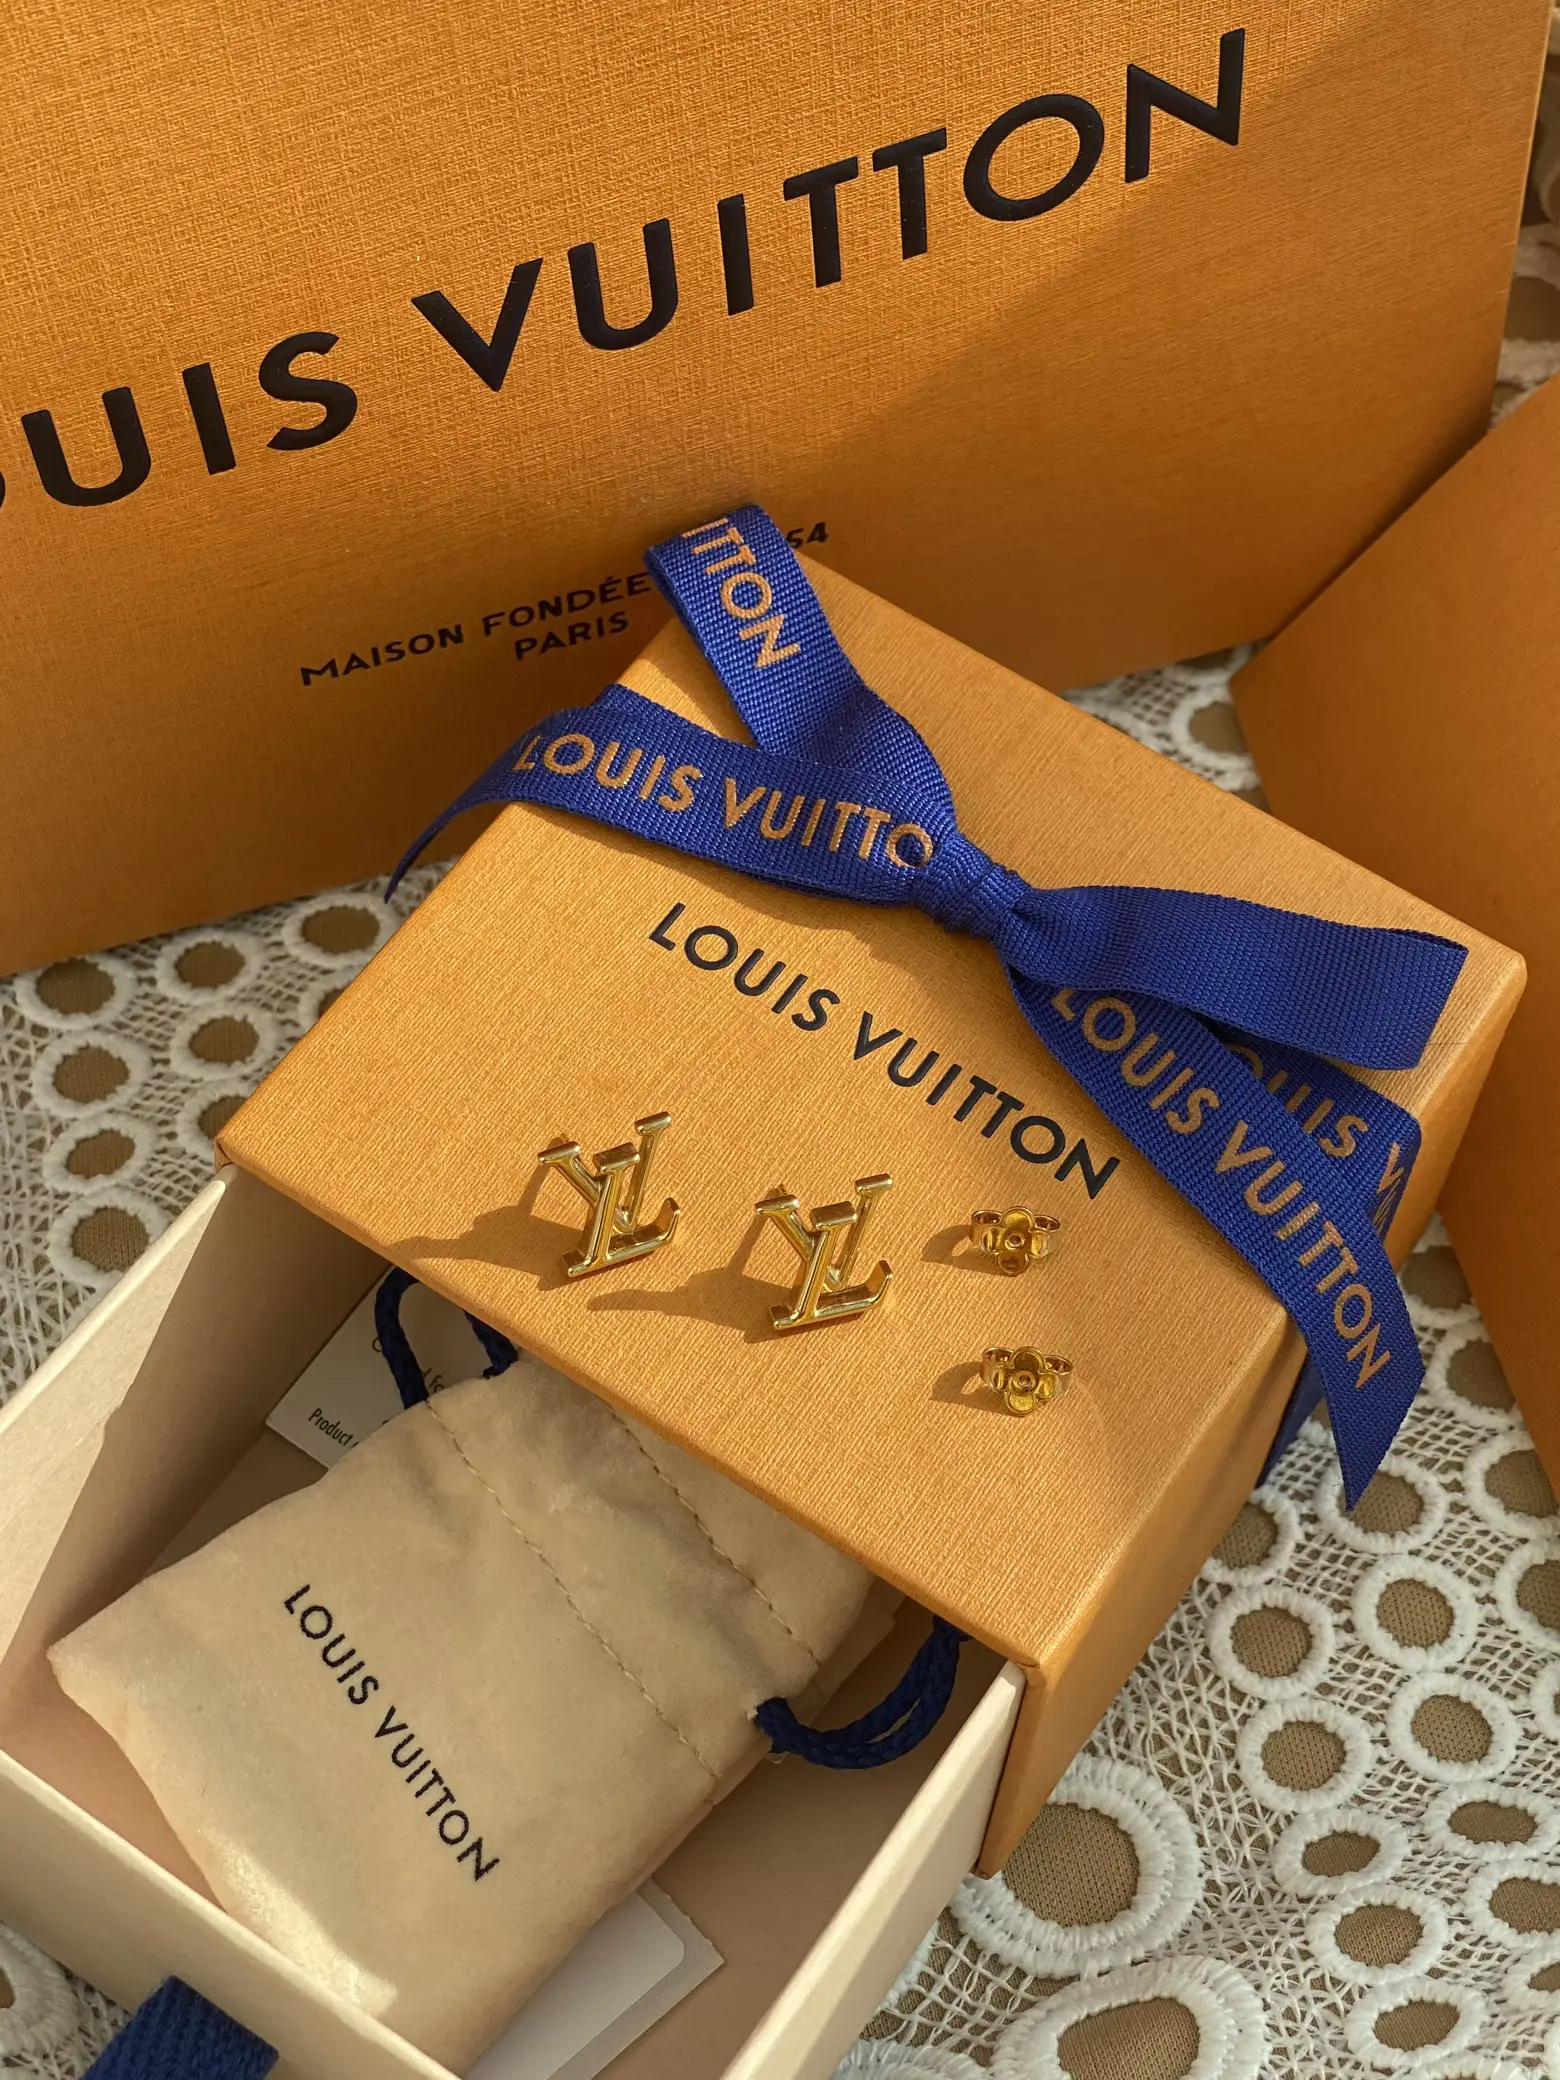 Triple Louis Vuitton Unboxing Haul! Tips to find hard to get